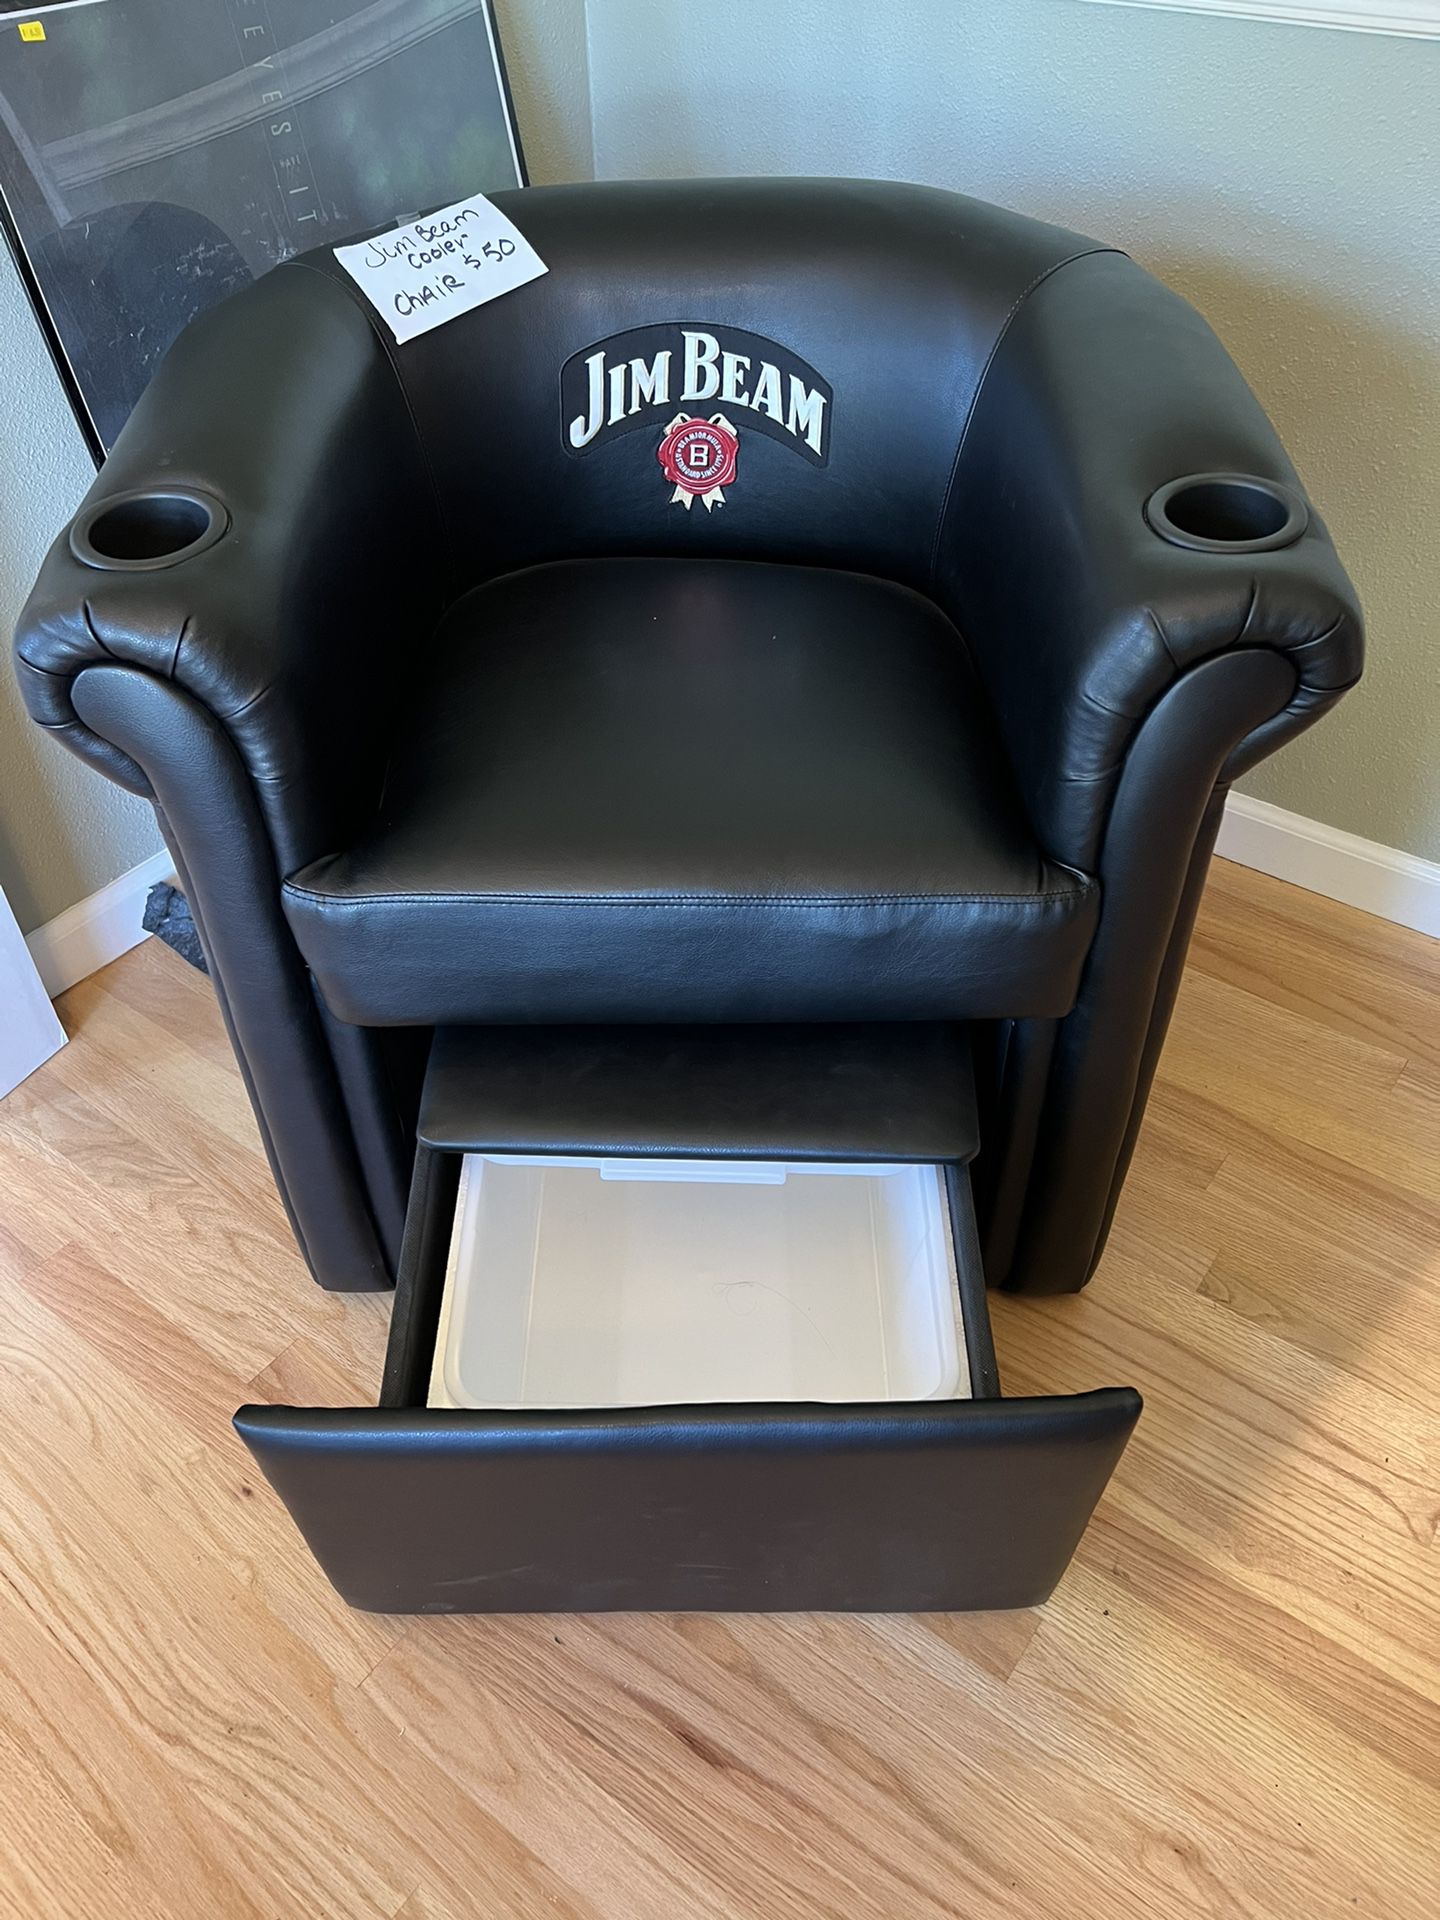 Jim Beam Chair with Cooler Bottom